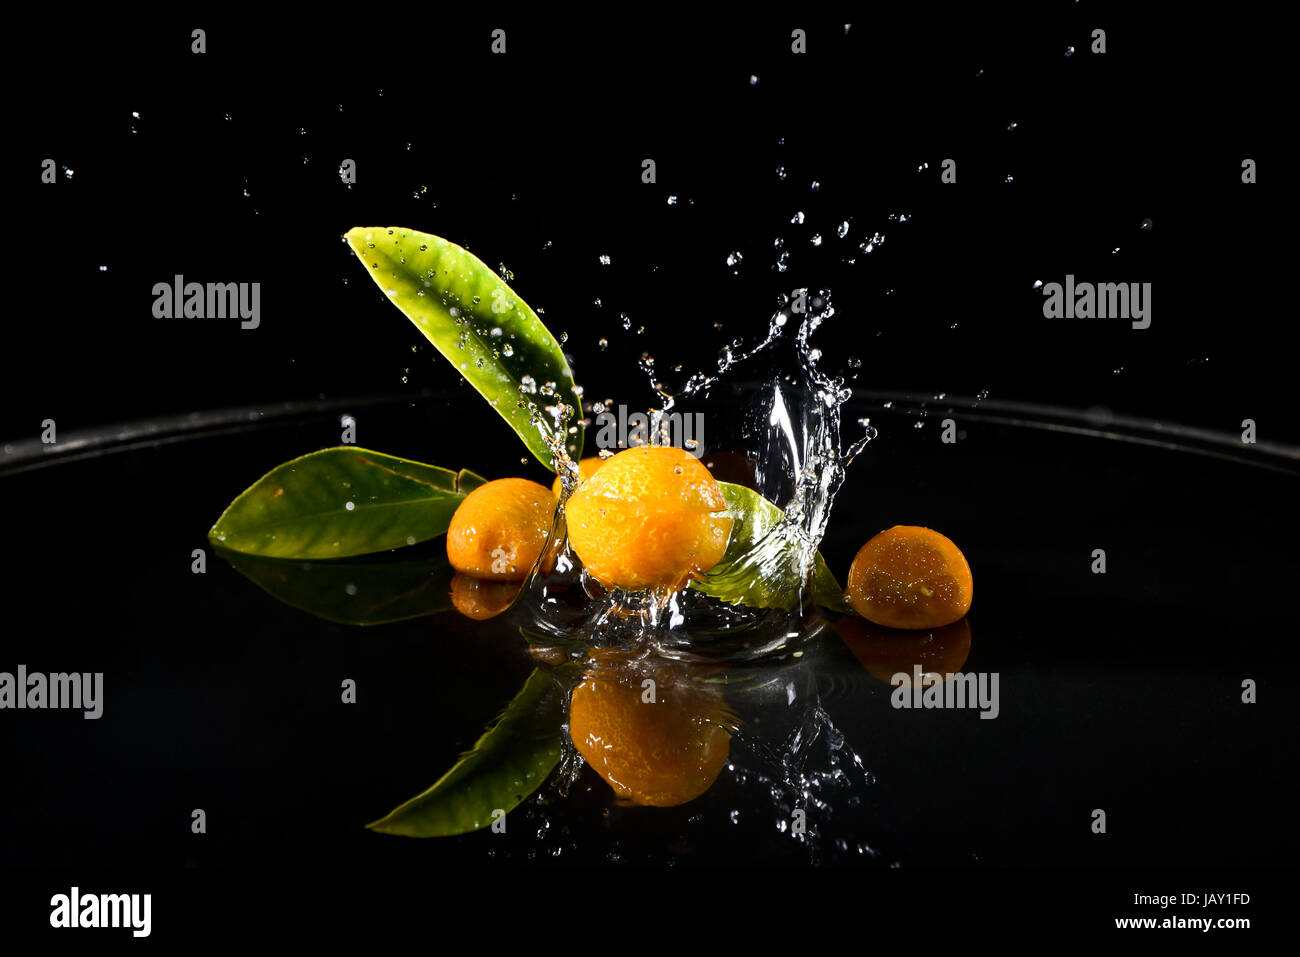 citrus fruit falling in water drops splashing everywhere. Concept of freshness and purity. Stock Photo